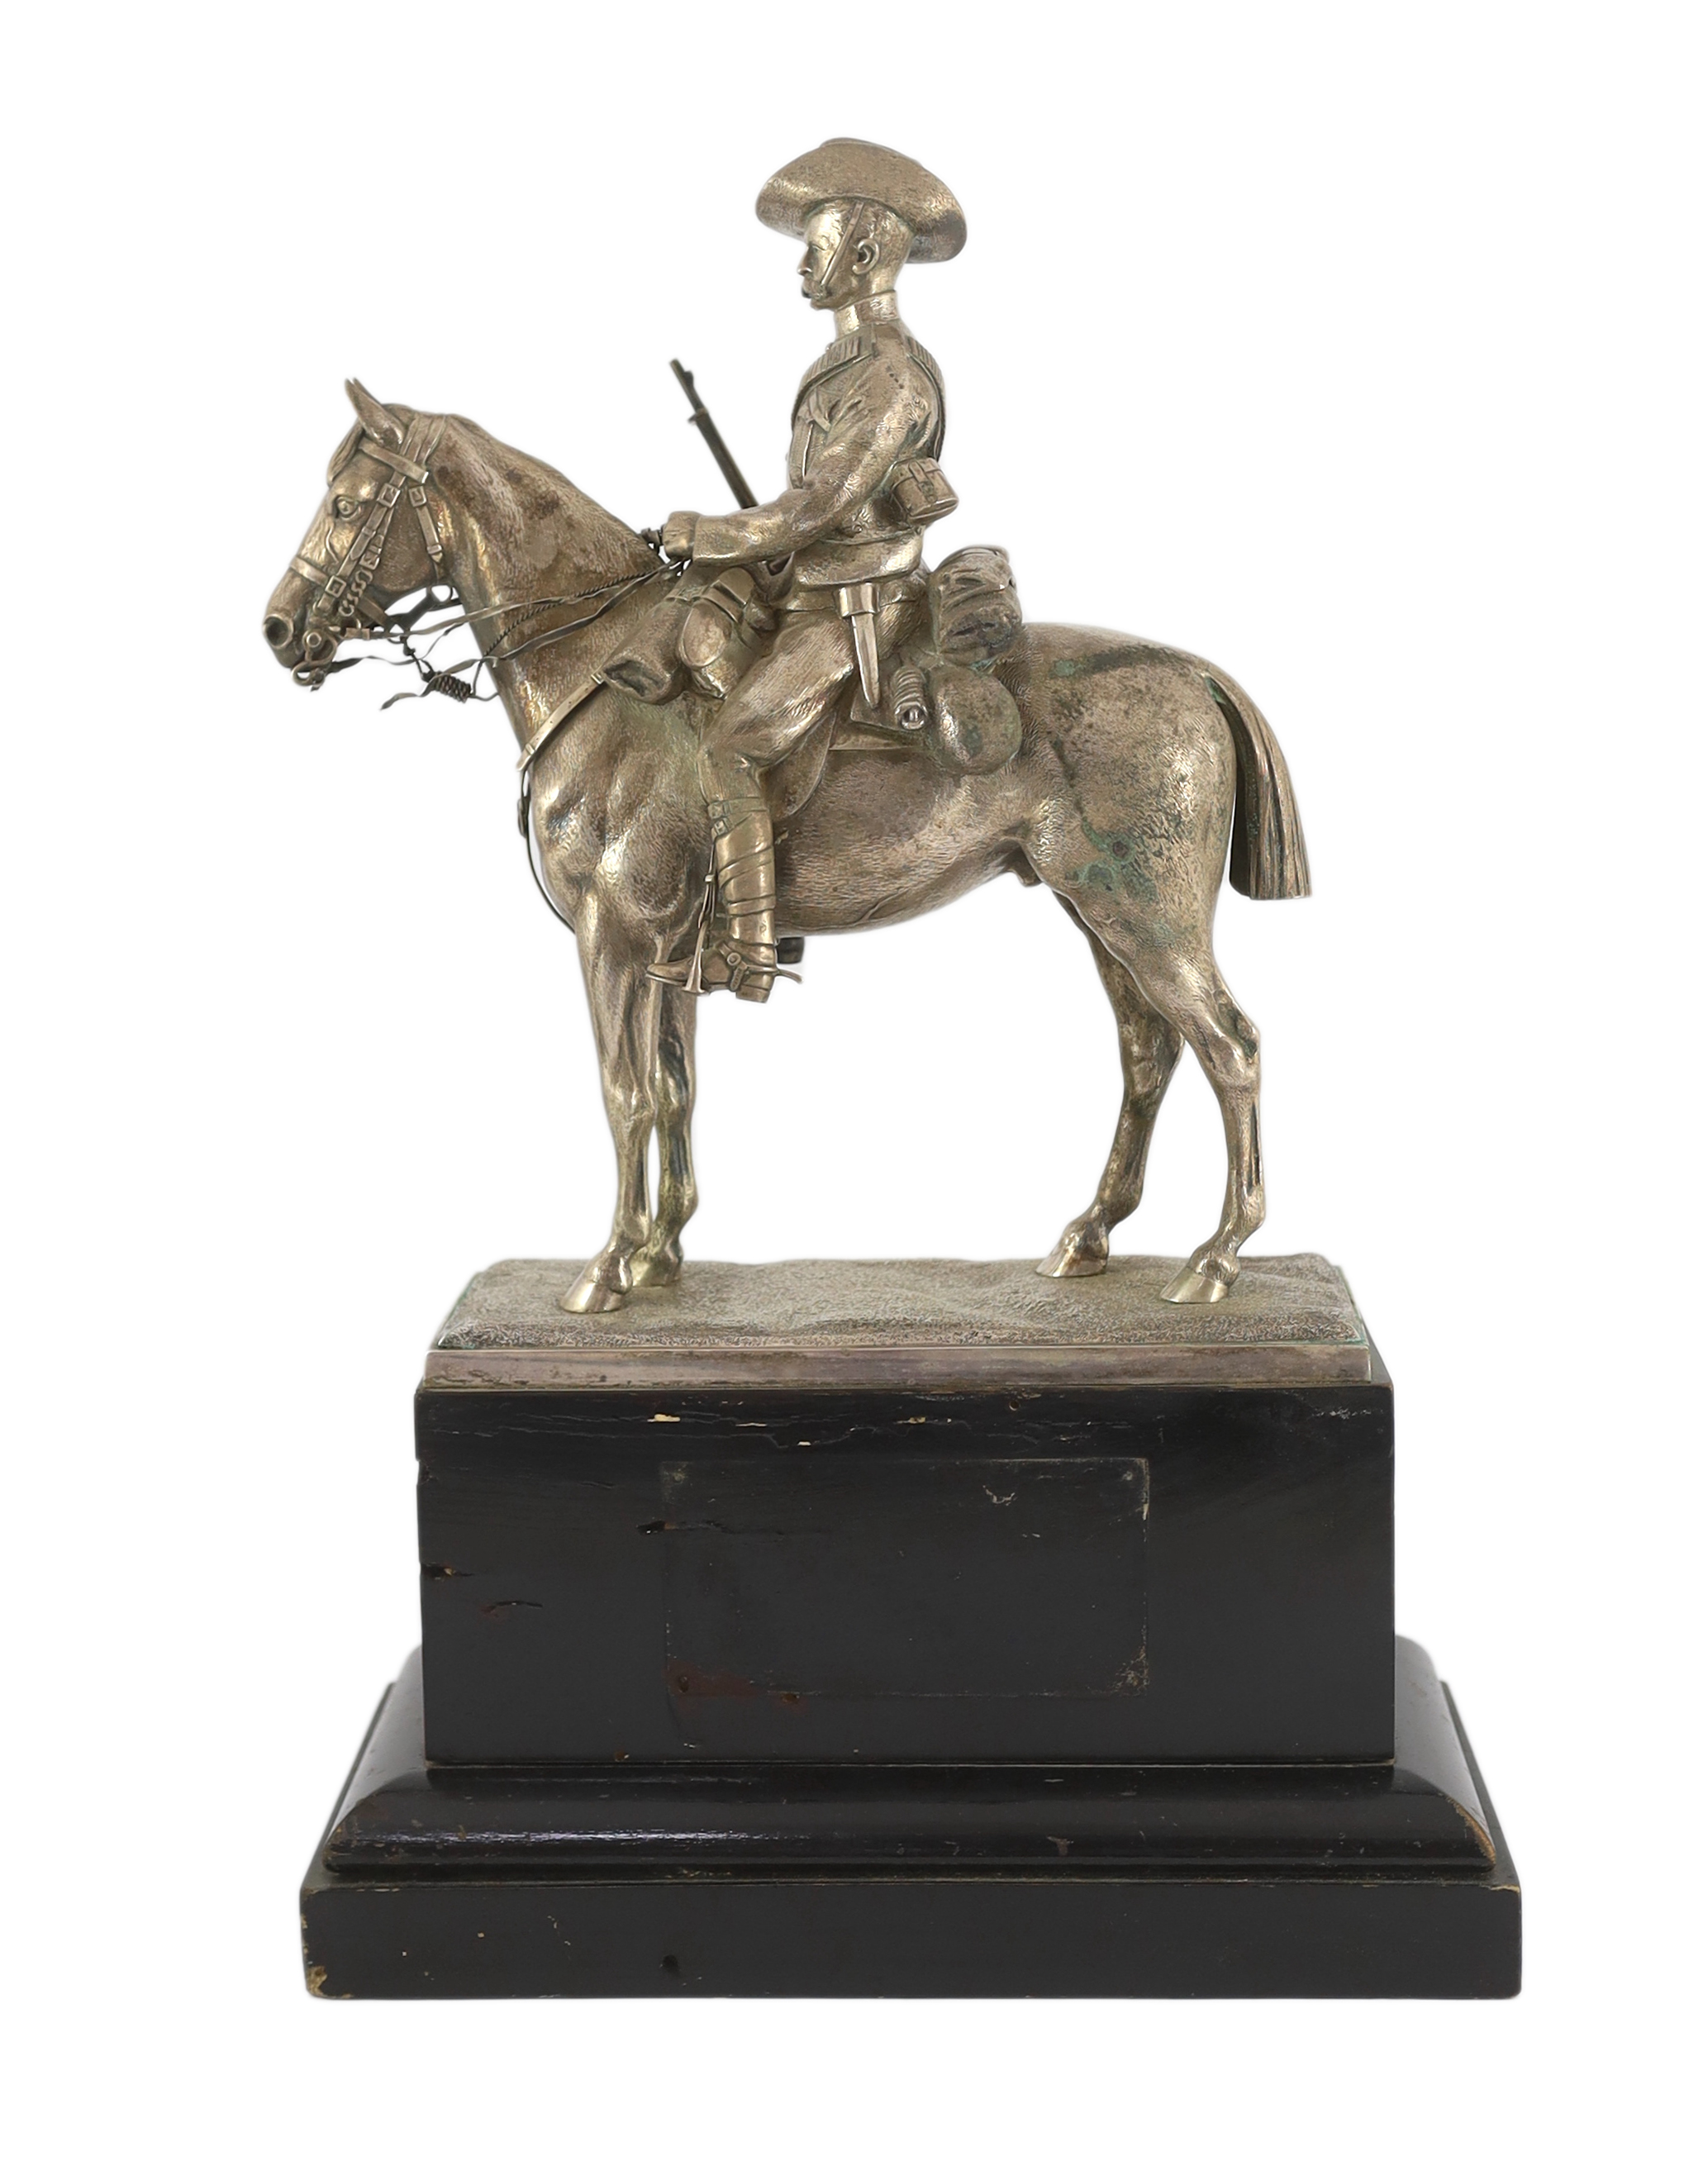 An early 20th century silver model of a City Imperial Volunteer, holding a rifle, on horseback, early 20th century